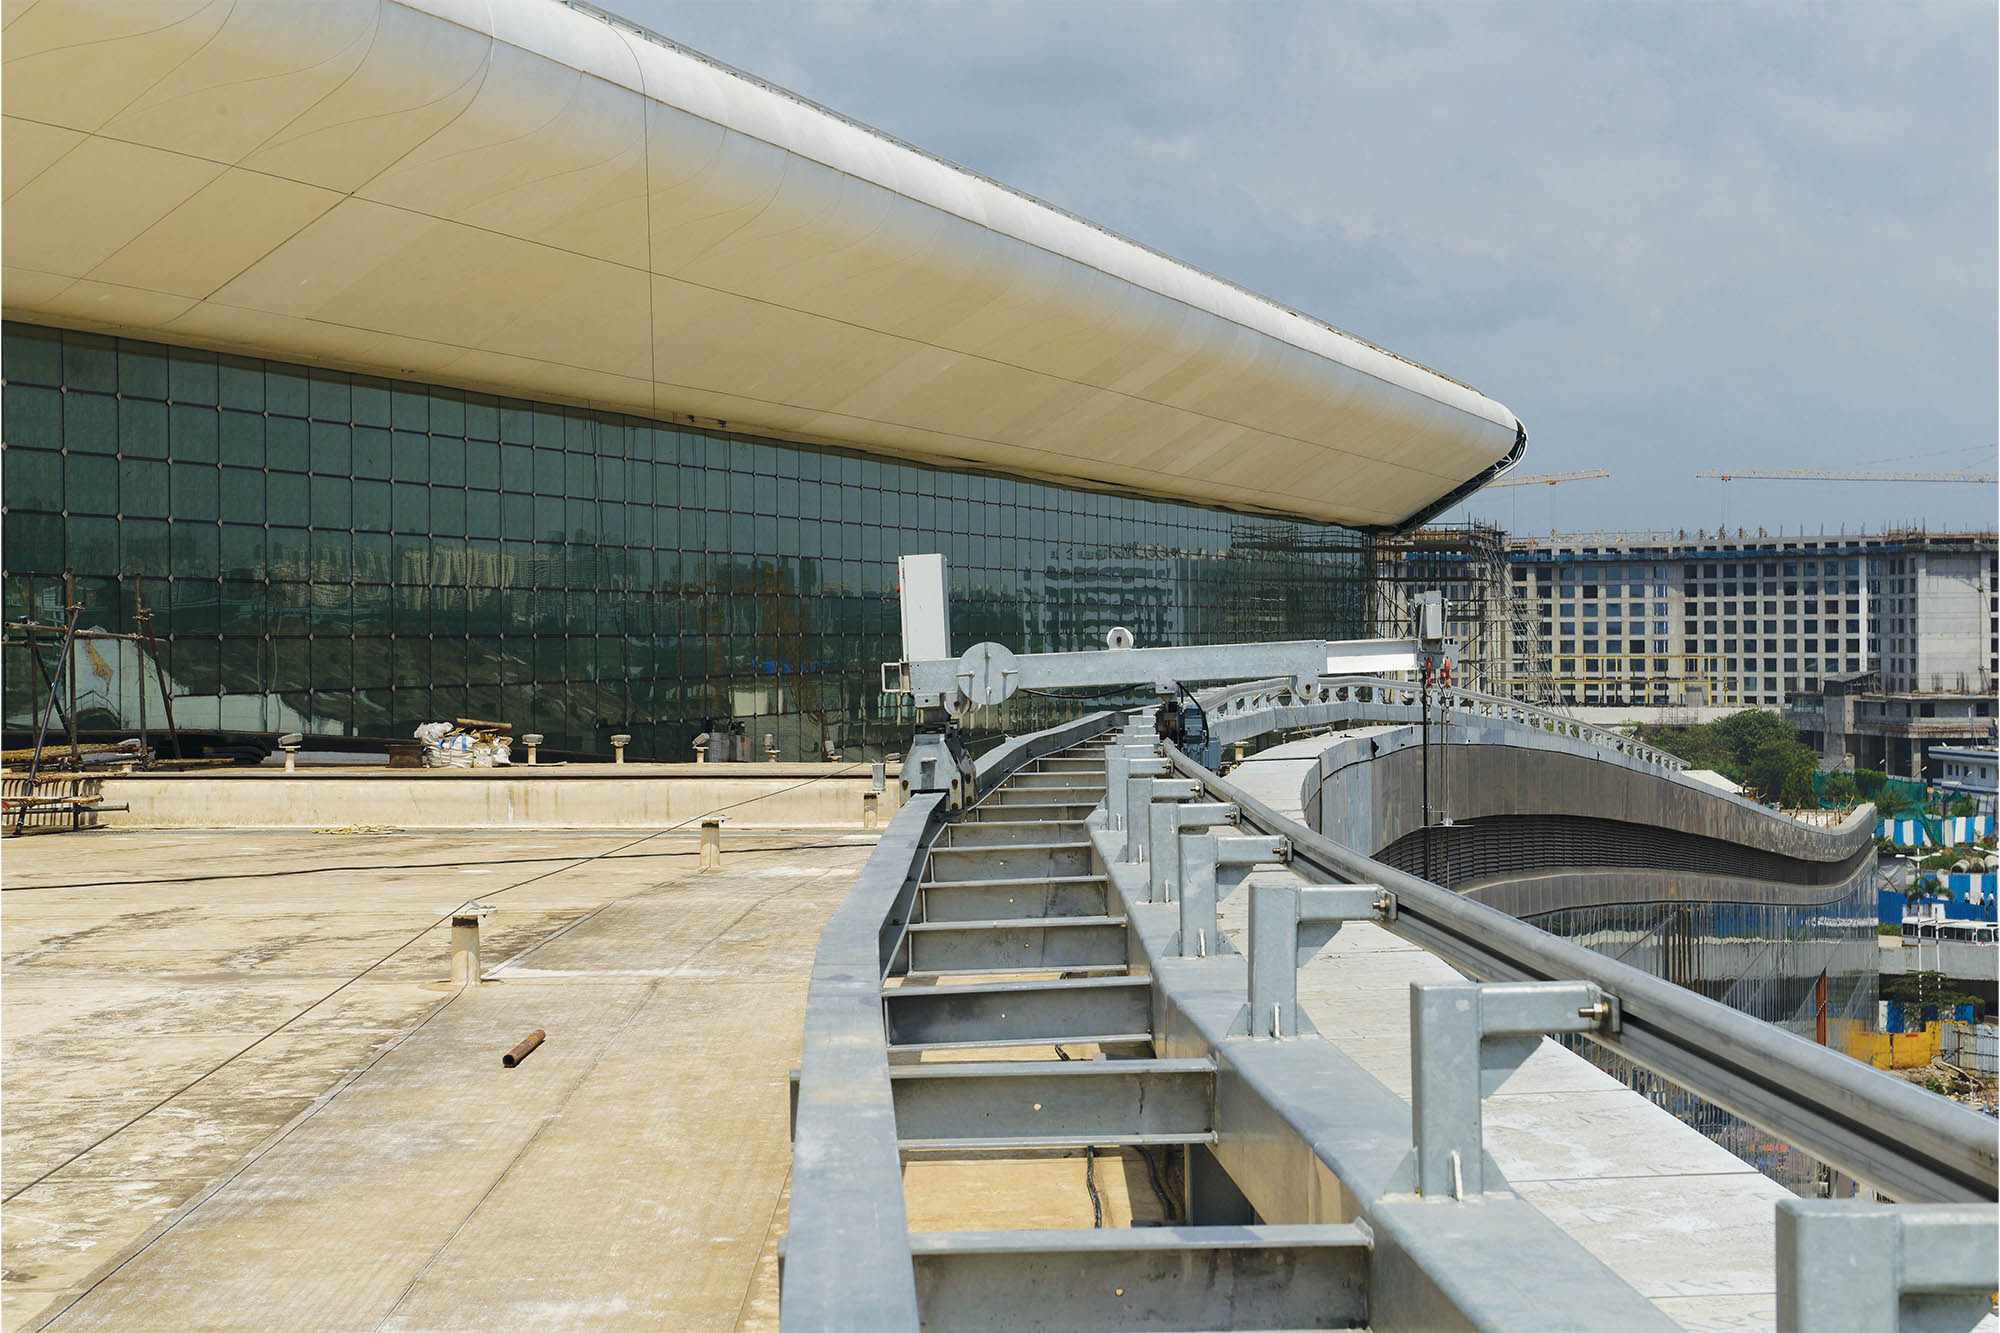 Clean India’s innovative facade access systems transforming airport aesthetics